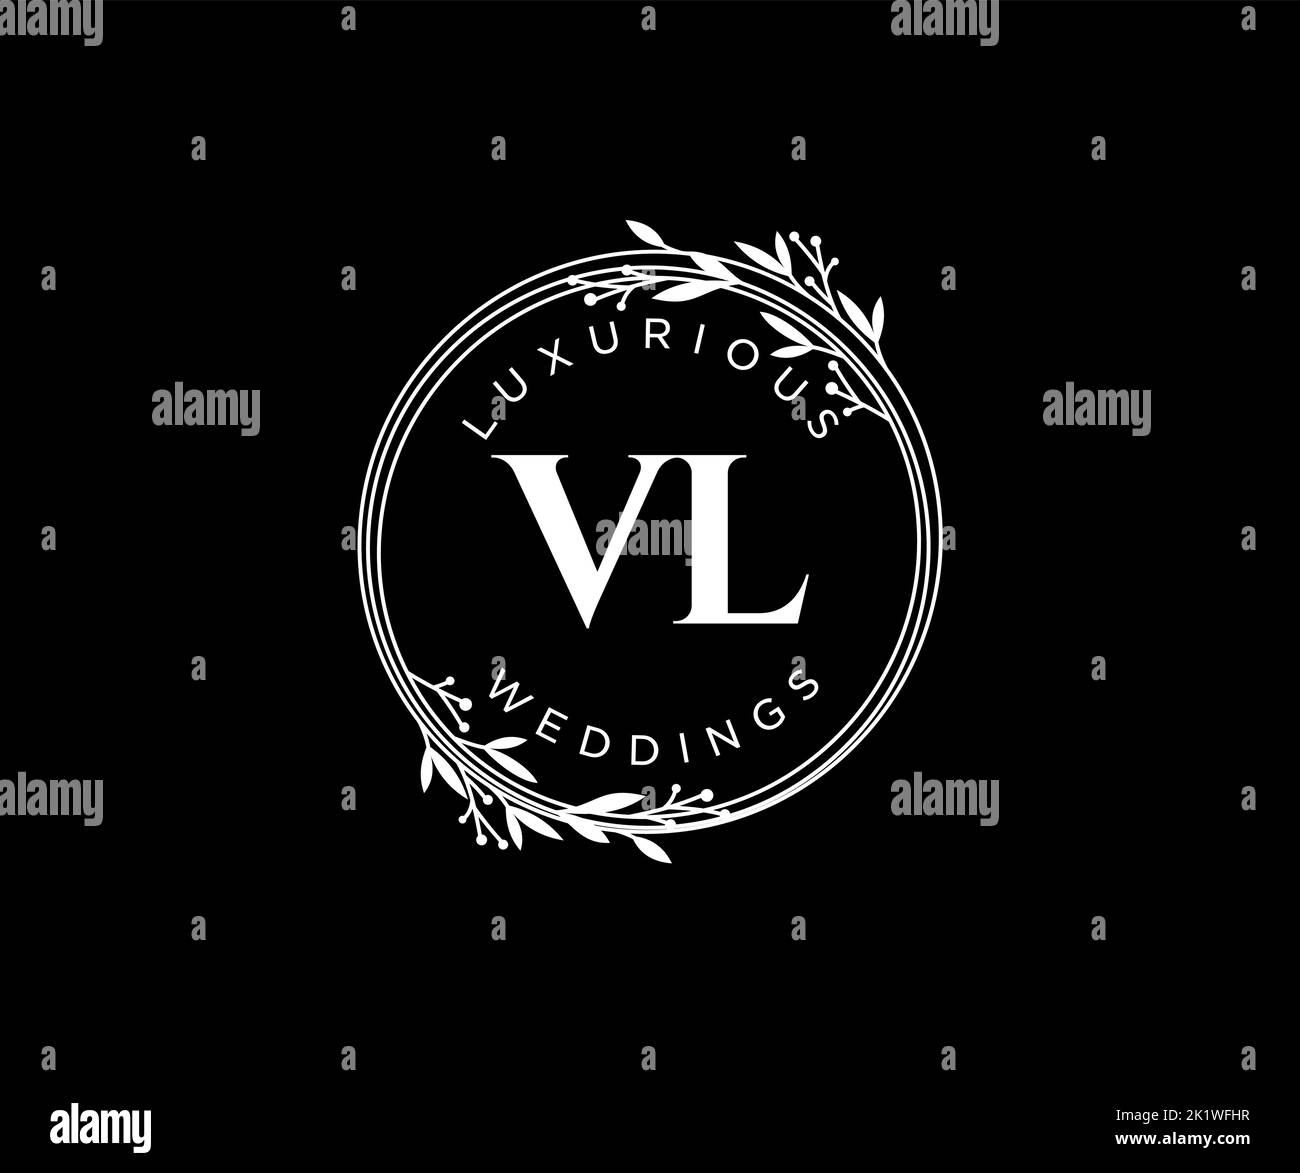 Vl logo with circle rounded negative space design Vector Image